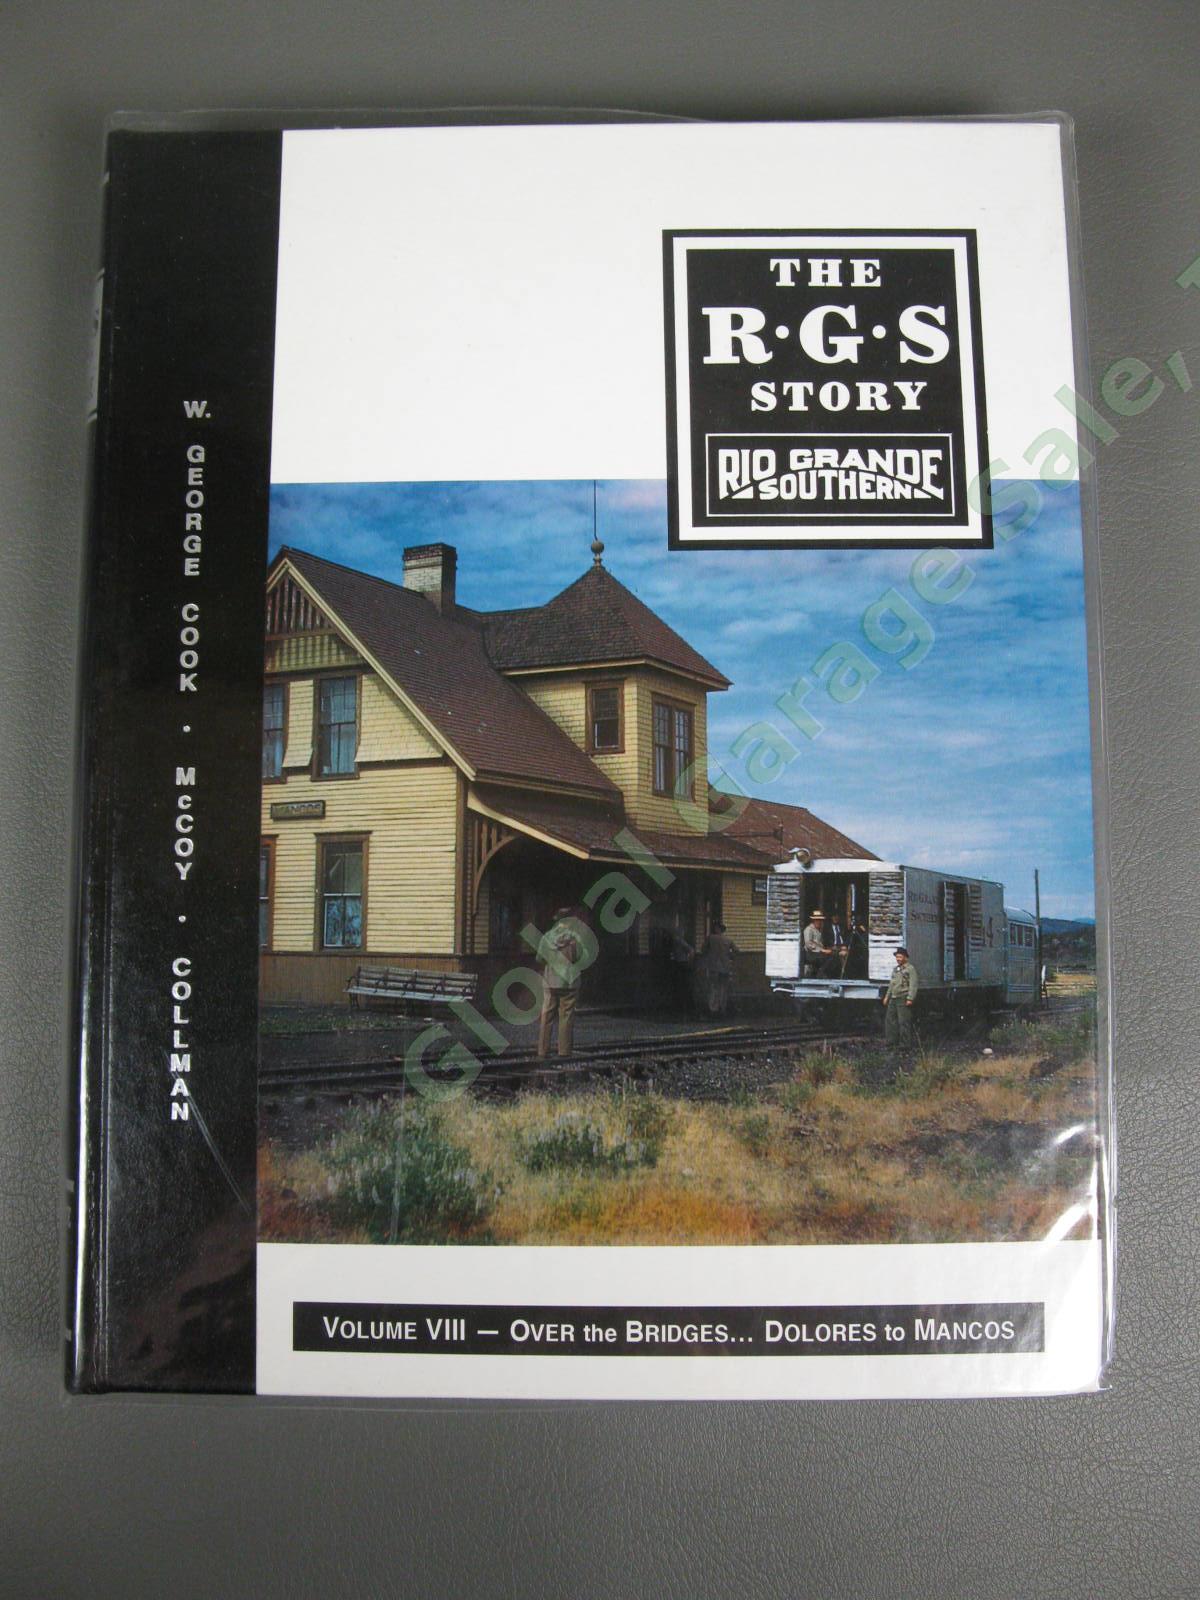 The RGS Story Rio Grande Southern Vol VIII 8 Over The Bridges Dolores to Mancos